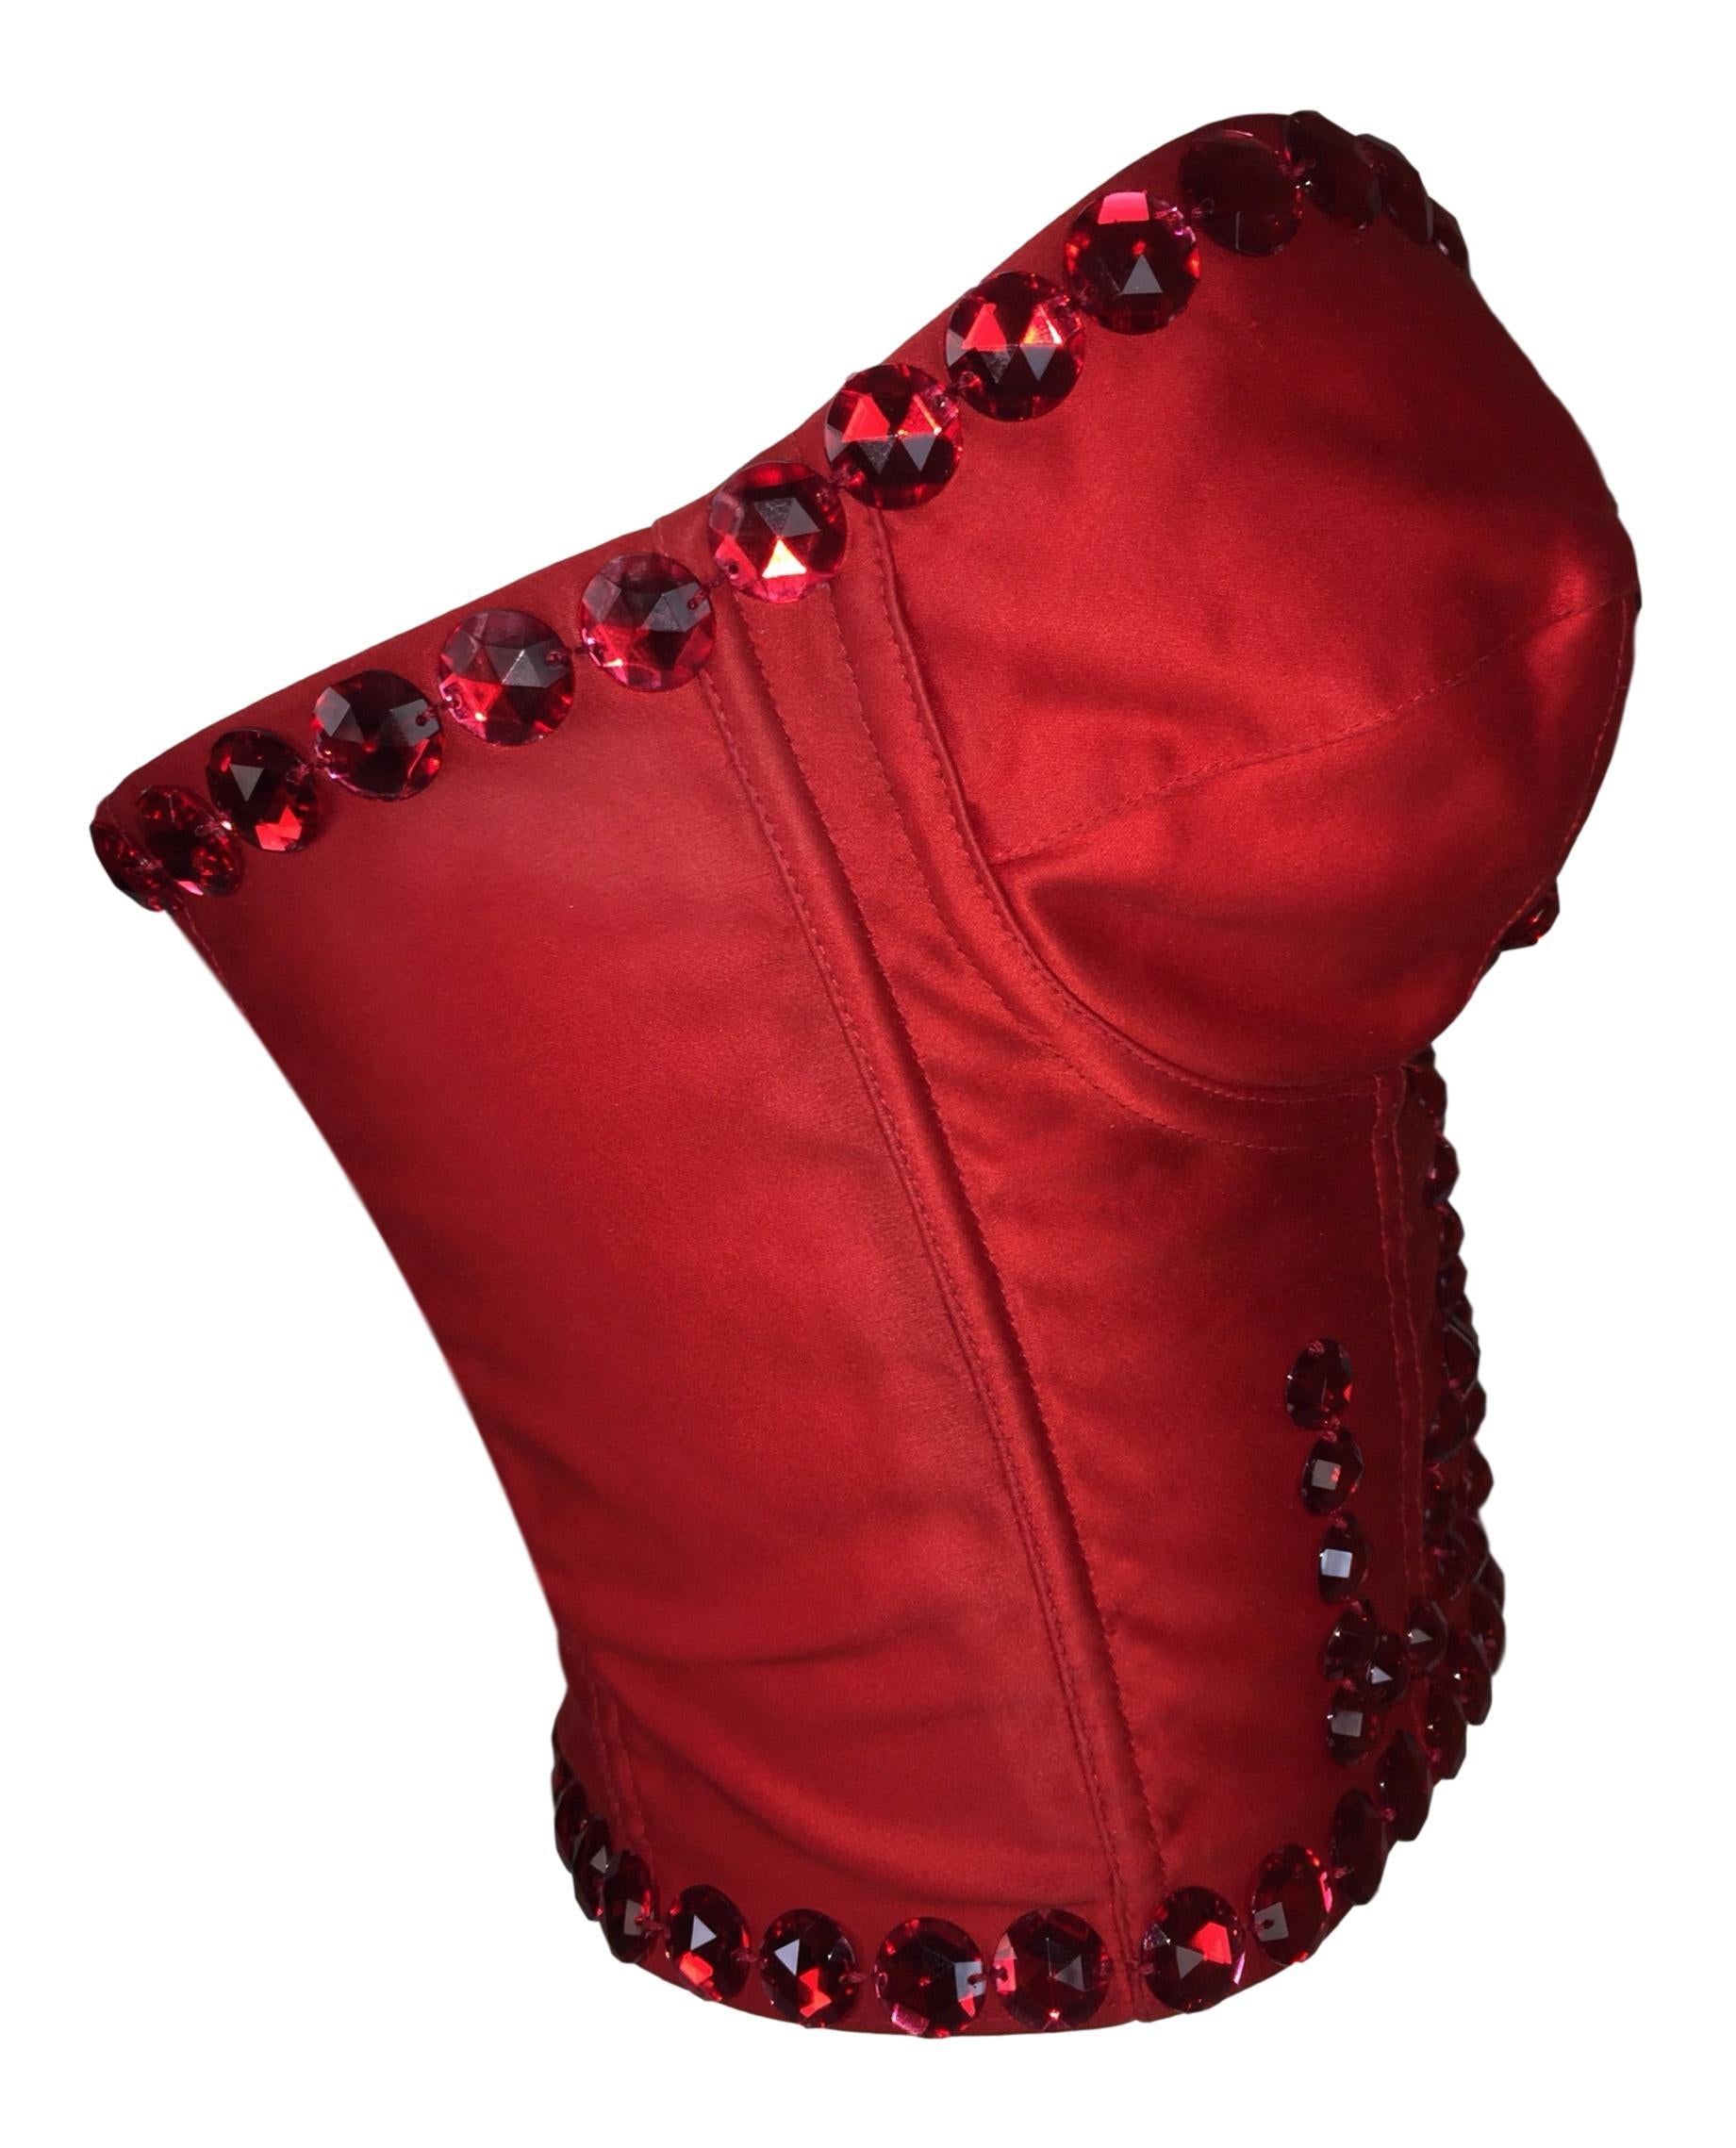 S/S 1992 Dolce & Gabbana Runway SEX & LOVE Red Crystal Corset Bustier Crop Top In Good Condition In Yukon, OK